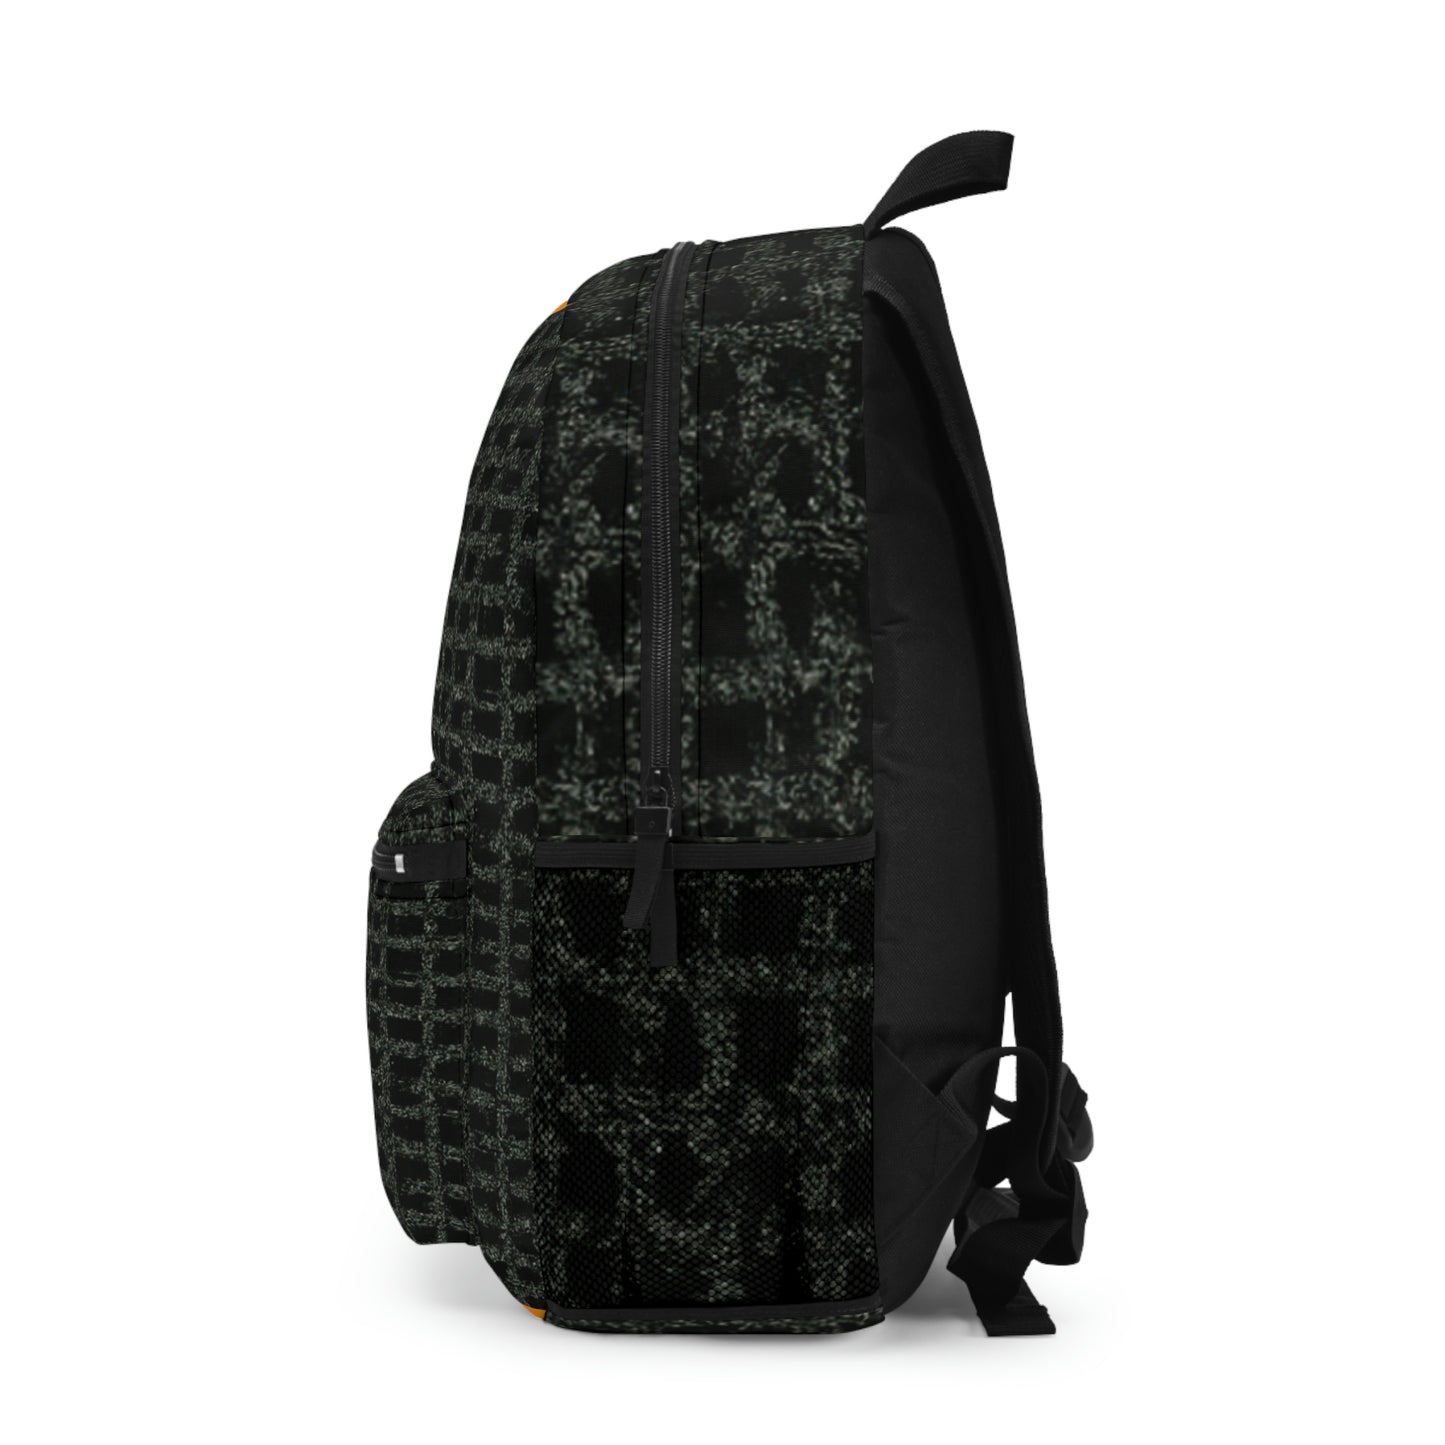 Official Streets 101 - Backpack (Hendrik Van Rembrand't)